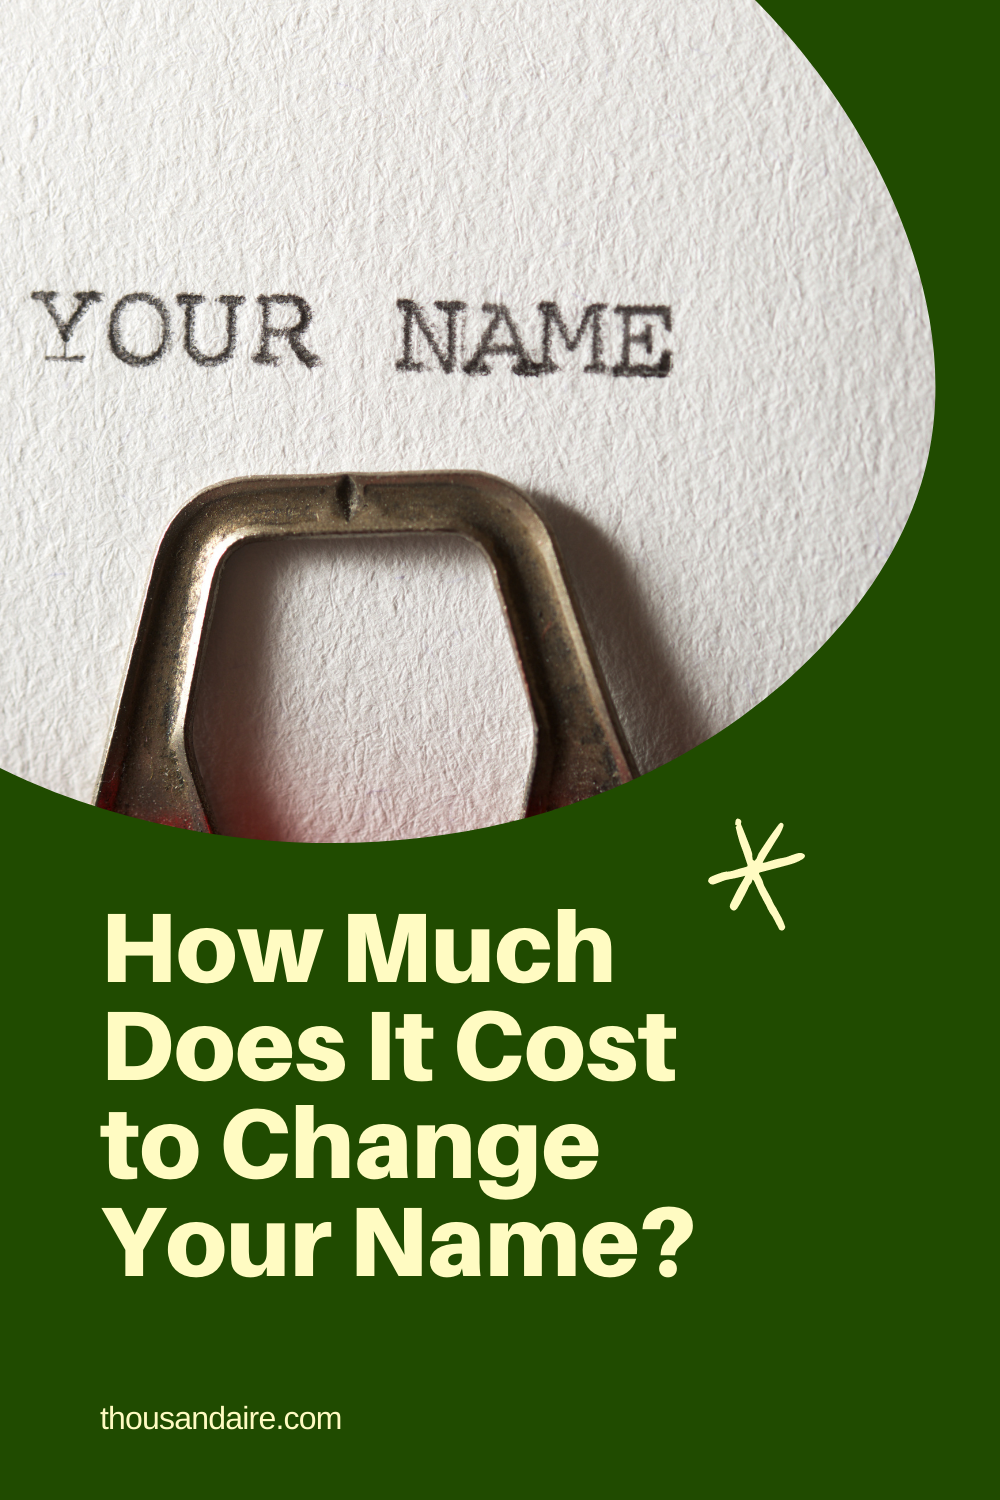 How Much Does It Cost to Change Your Name